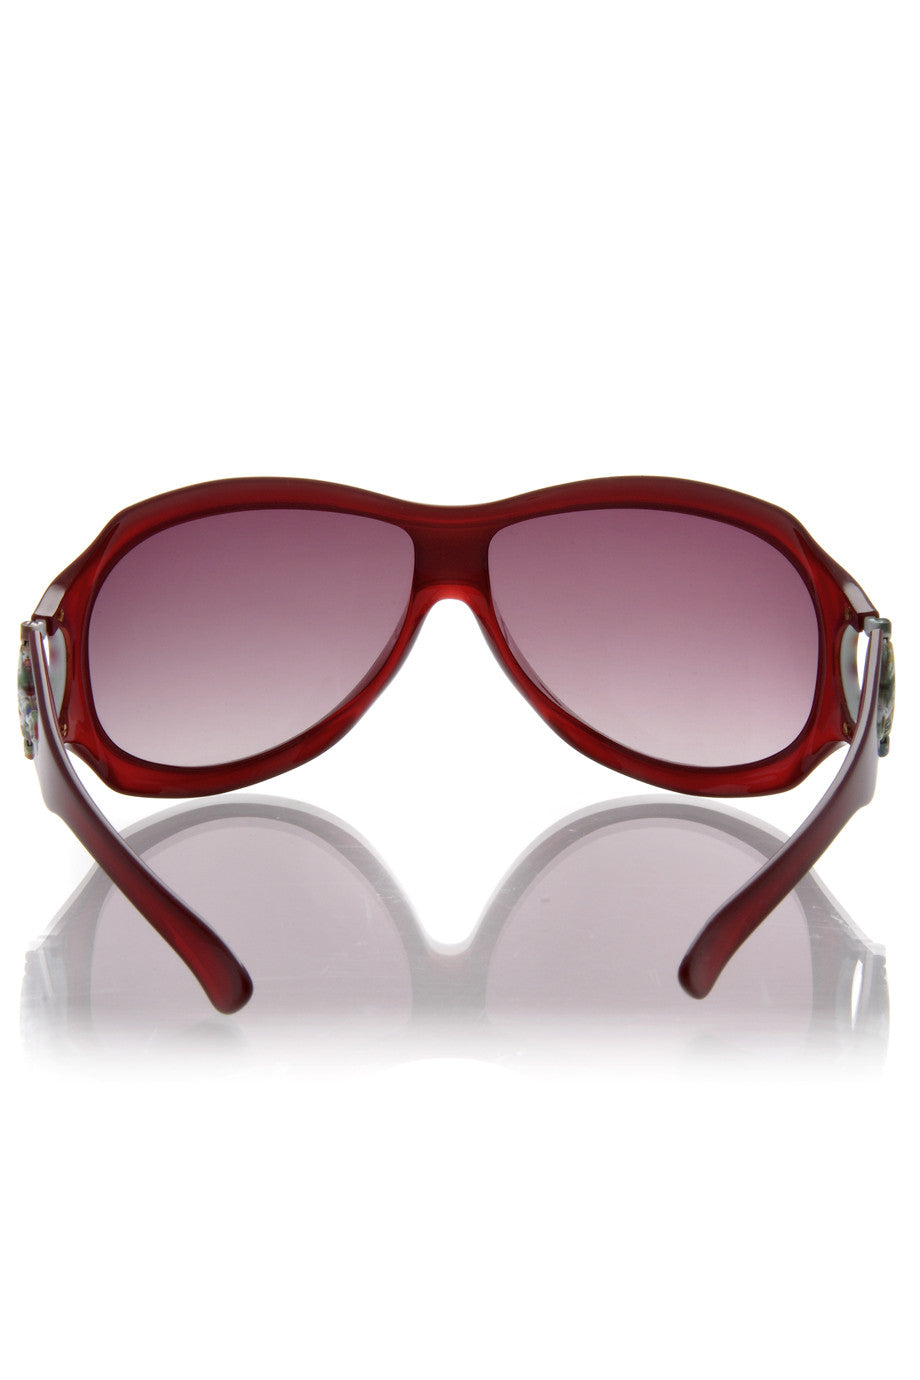 GUCCI Large Geen and Red Metal Aviator | GG0062s 003 | Free Shipping –  Sunglass Trend